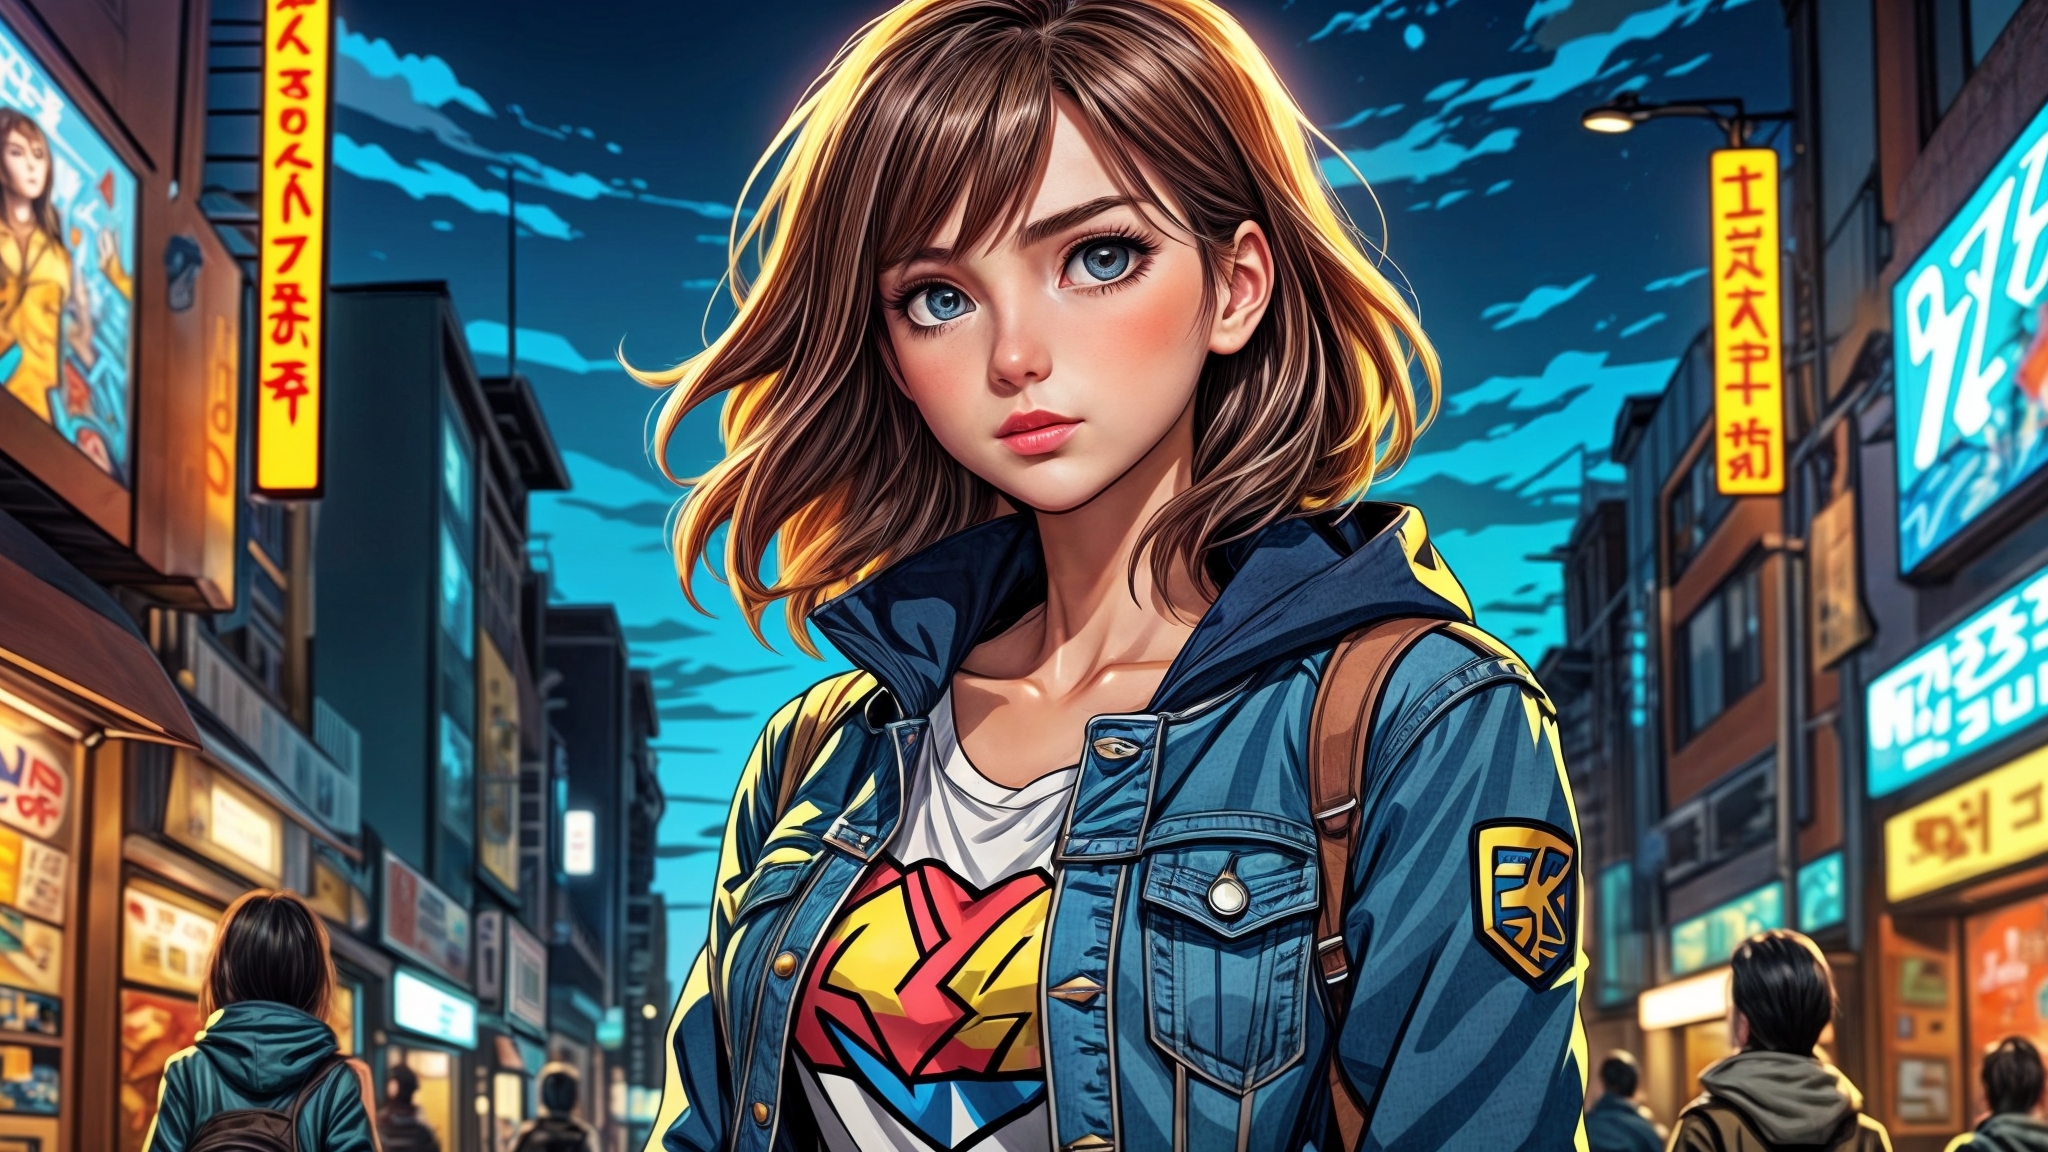 Drawing a portrait of a girl in a denim jacket on a city street